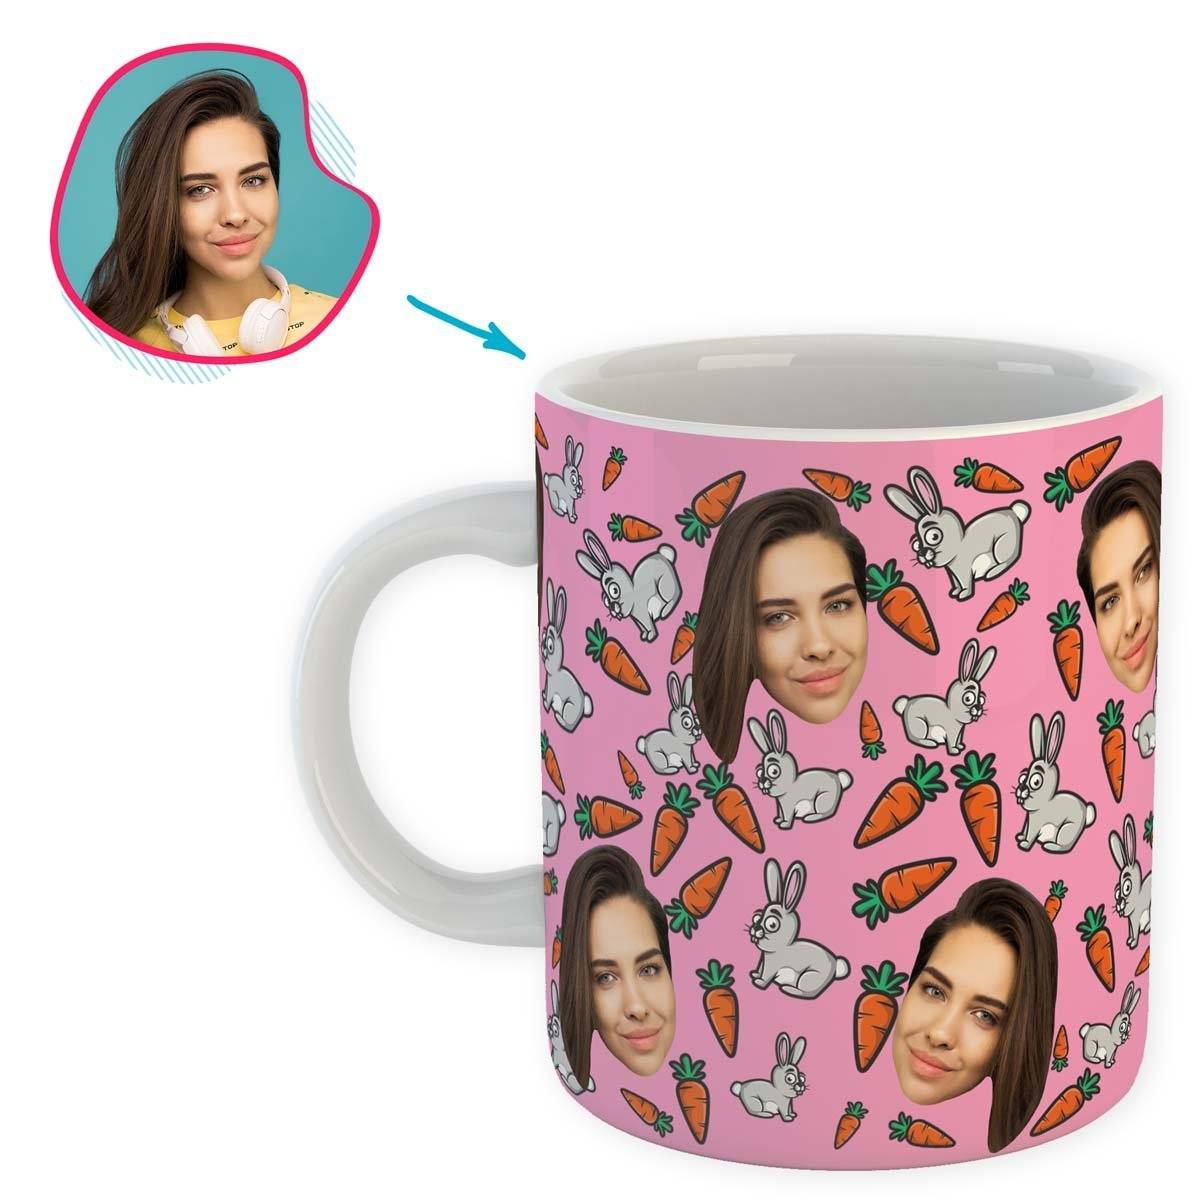 pink Bunny mug personalized with photo of face printed on it